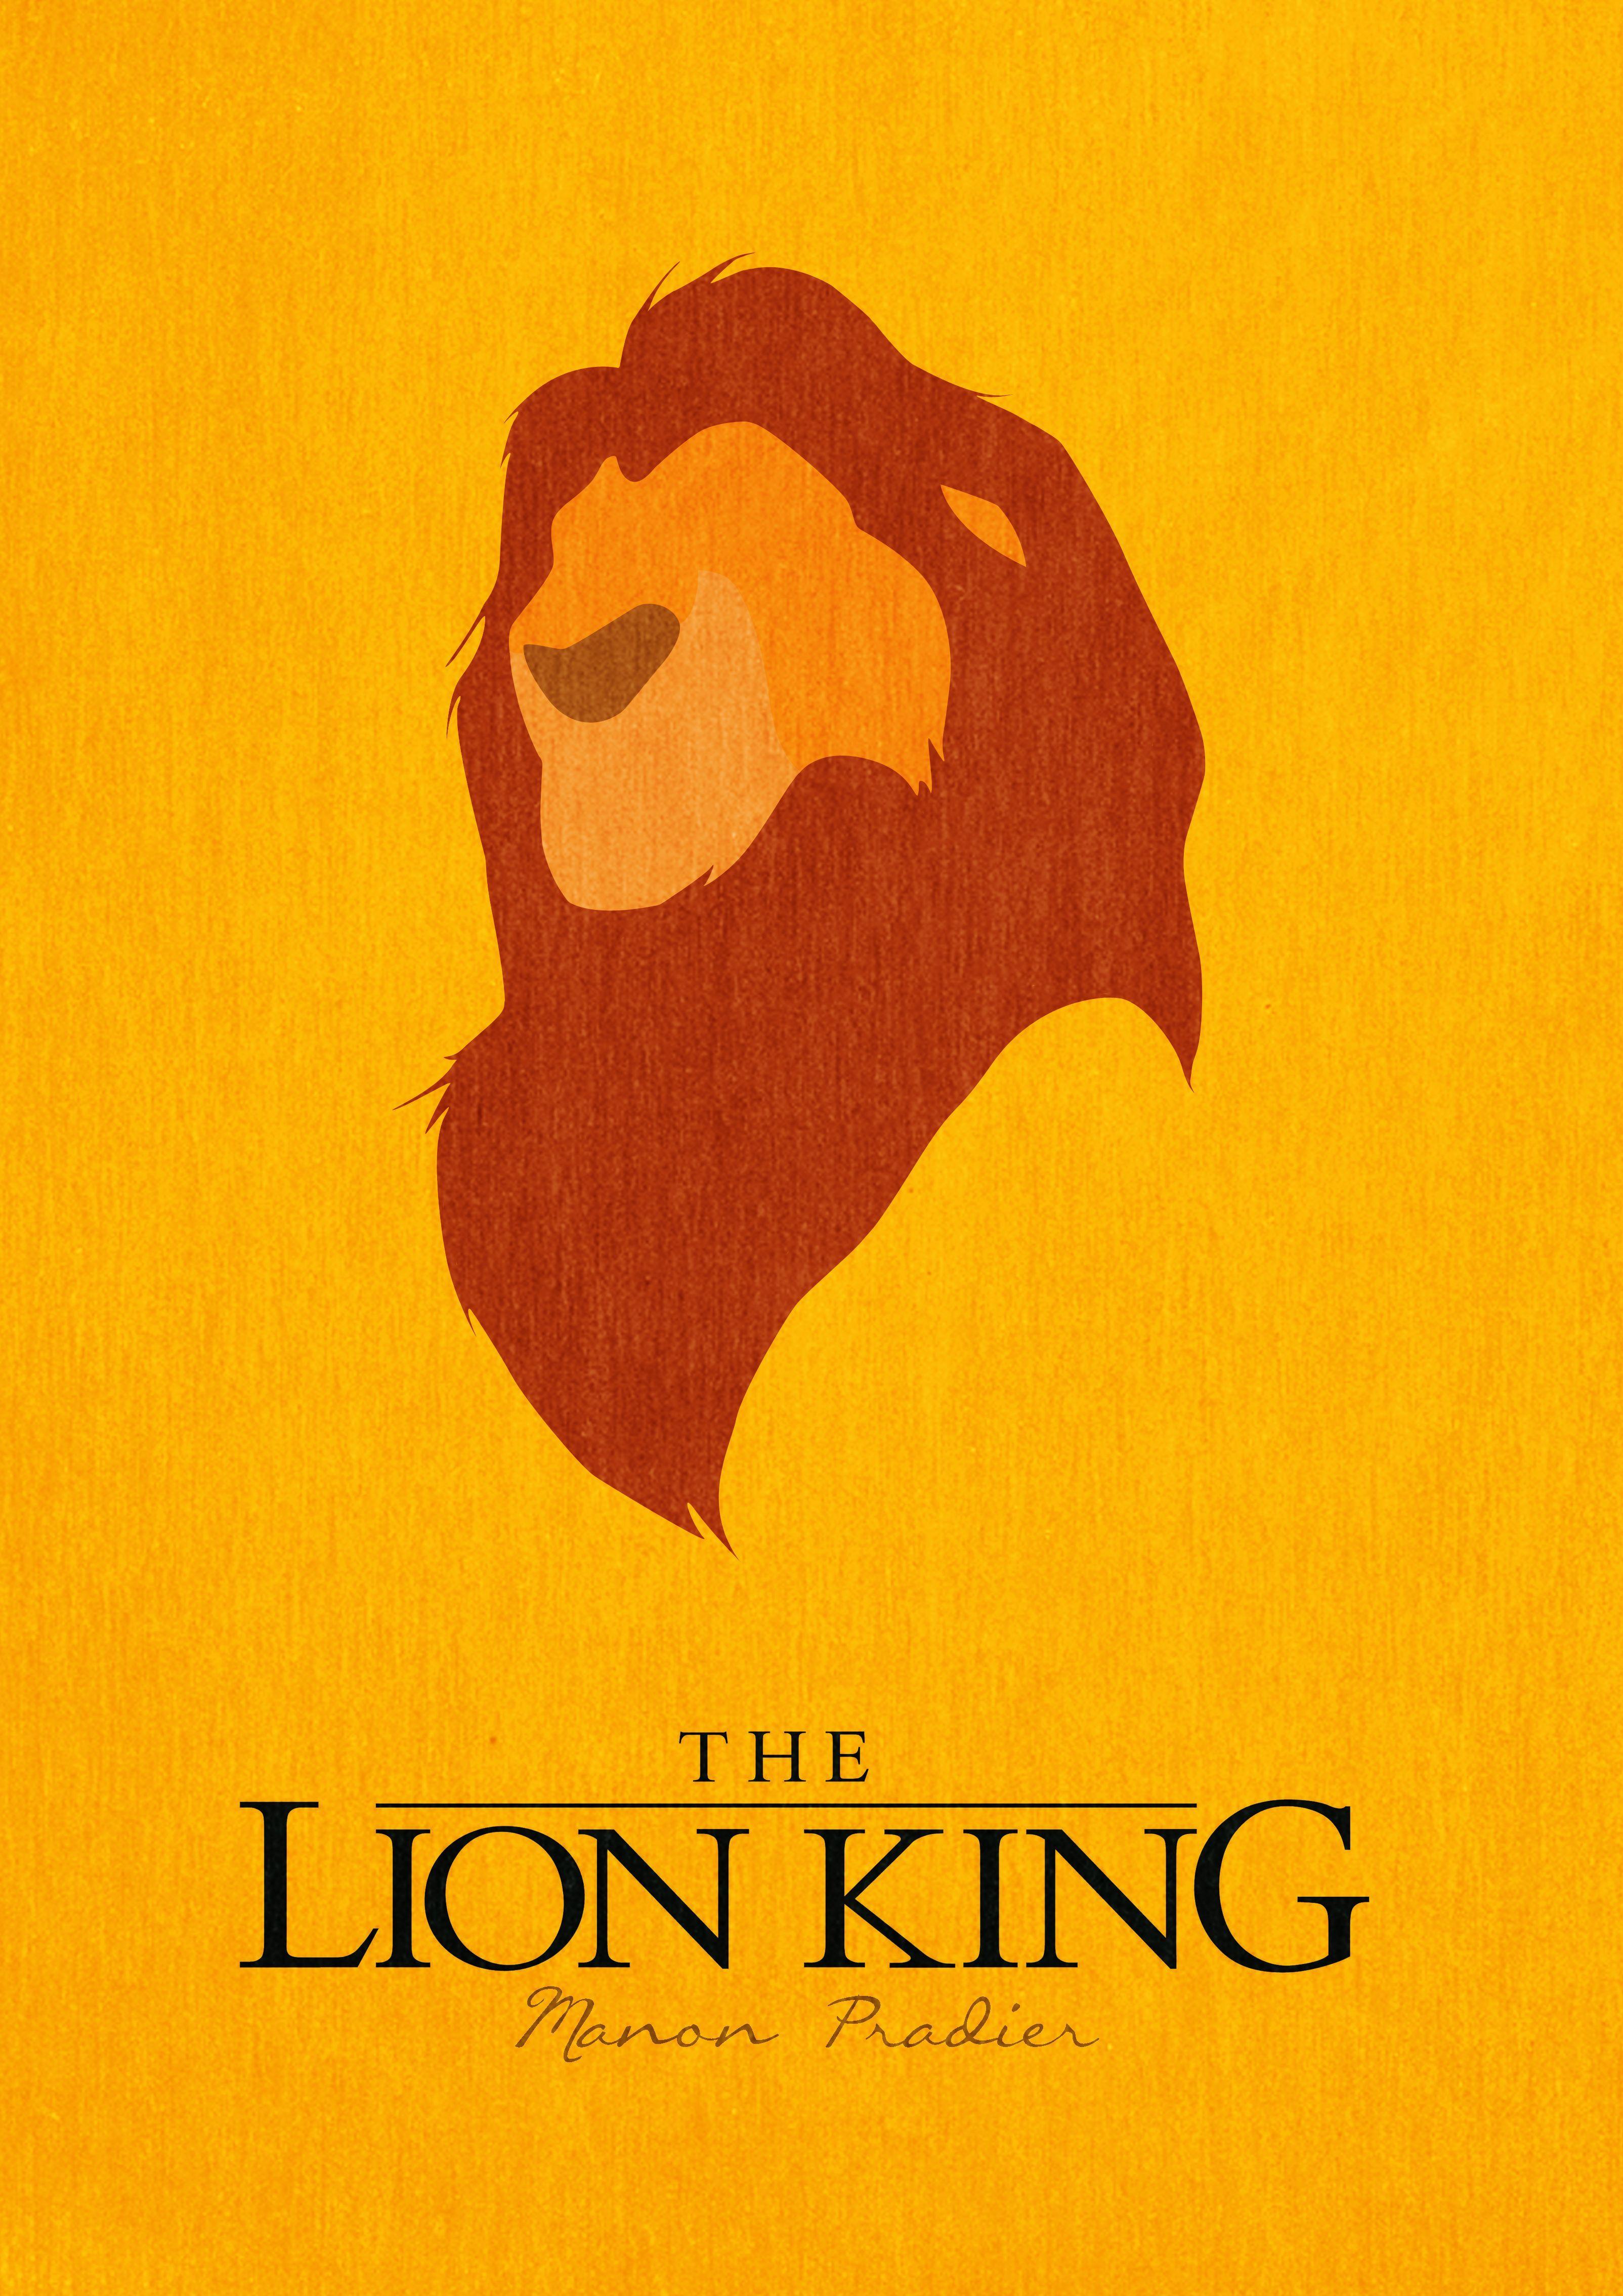 The Lion King Movie Logo - The Lion King - minimalist poster by manoulol.deviantart.com on ...